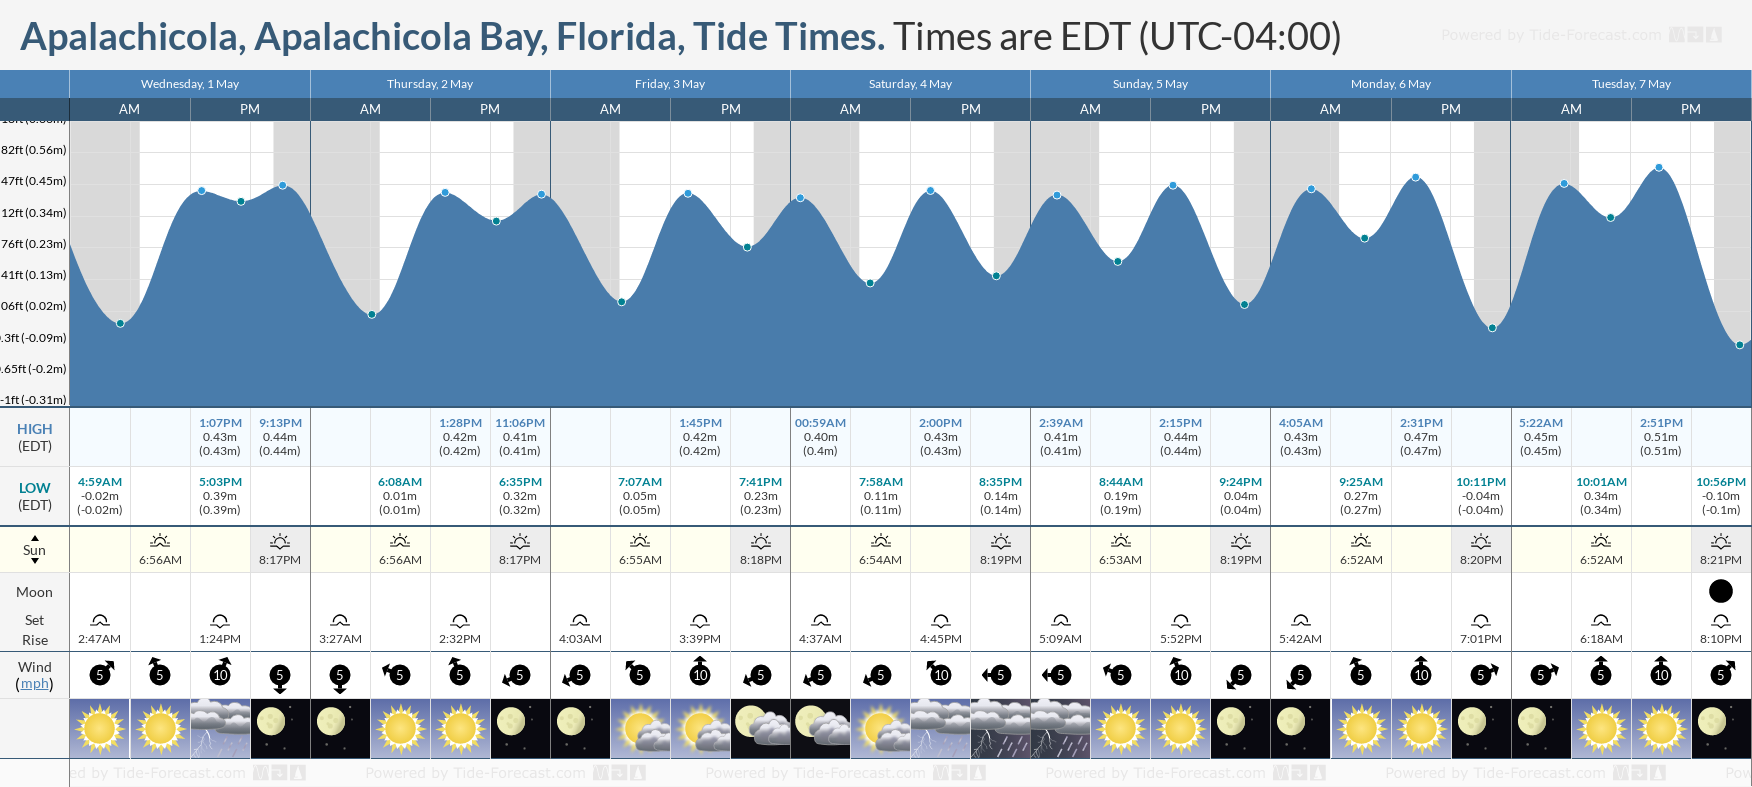 Apalachicola, Apalachicola Bay, Florida Tide Chart including high and low tide tide times for the next 7 days